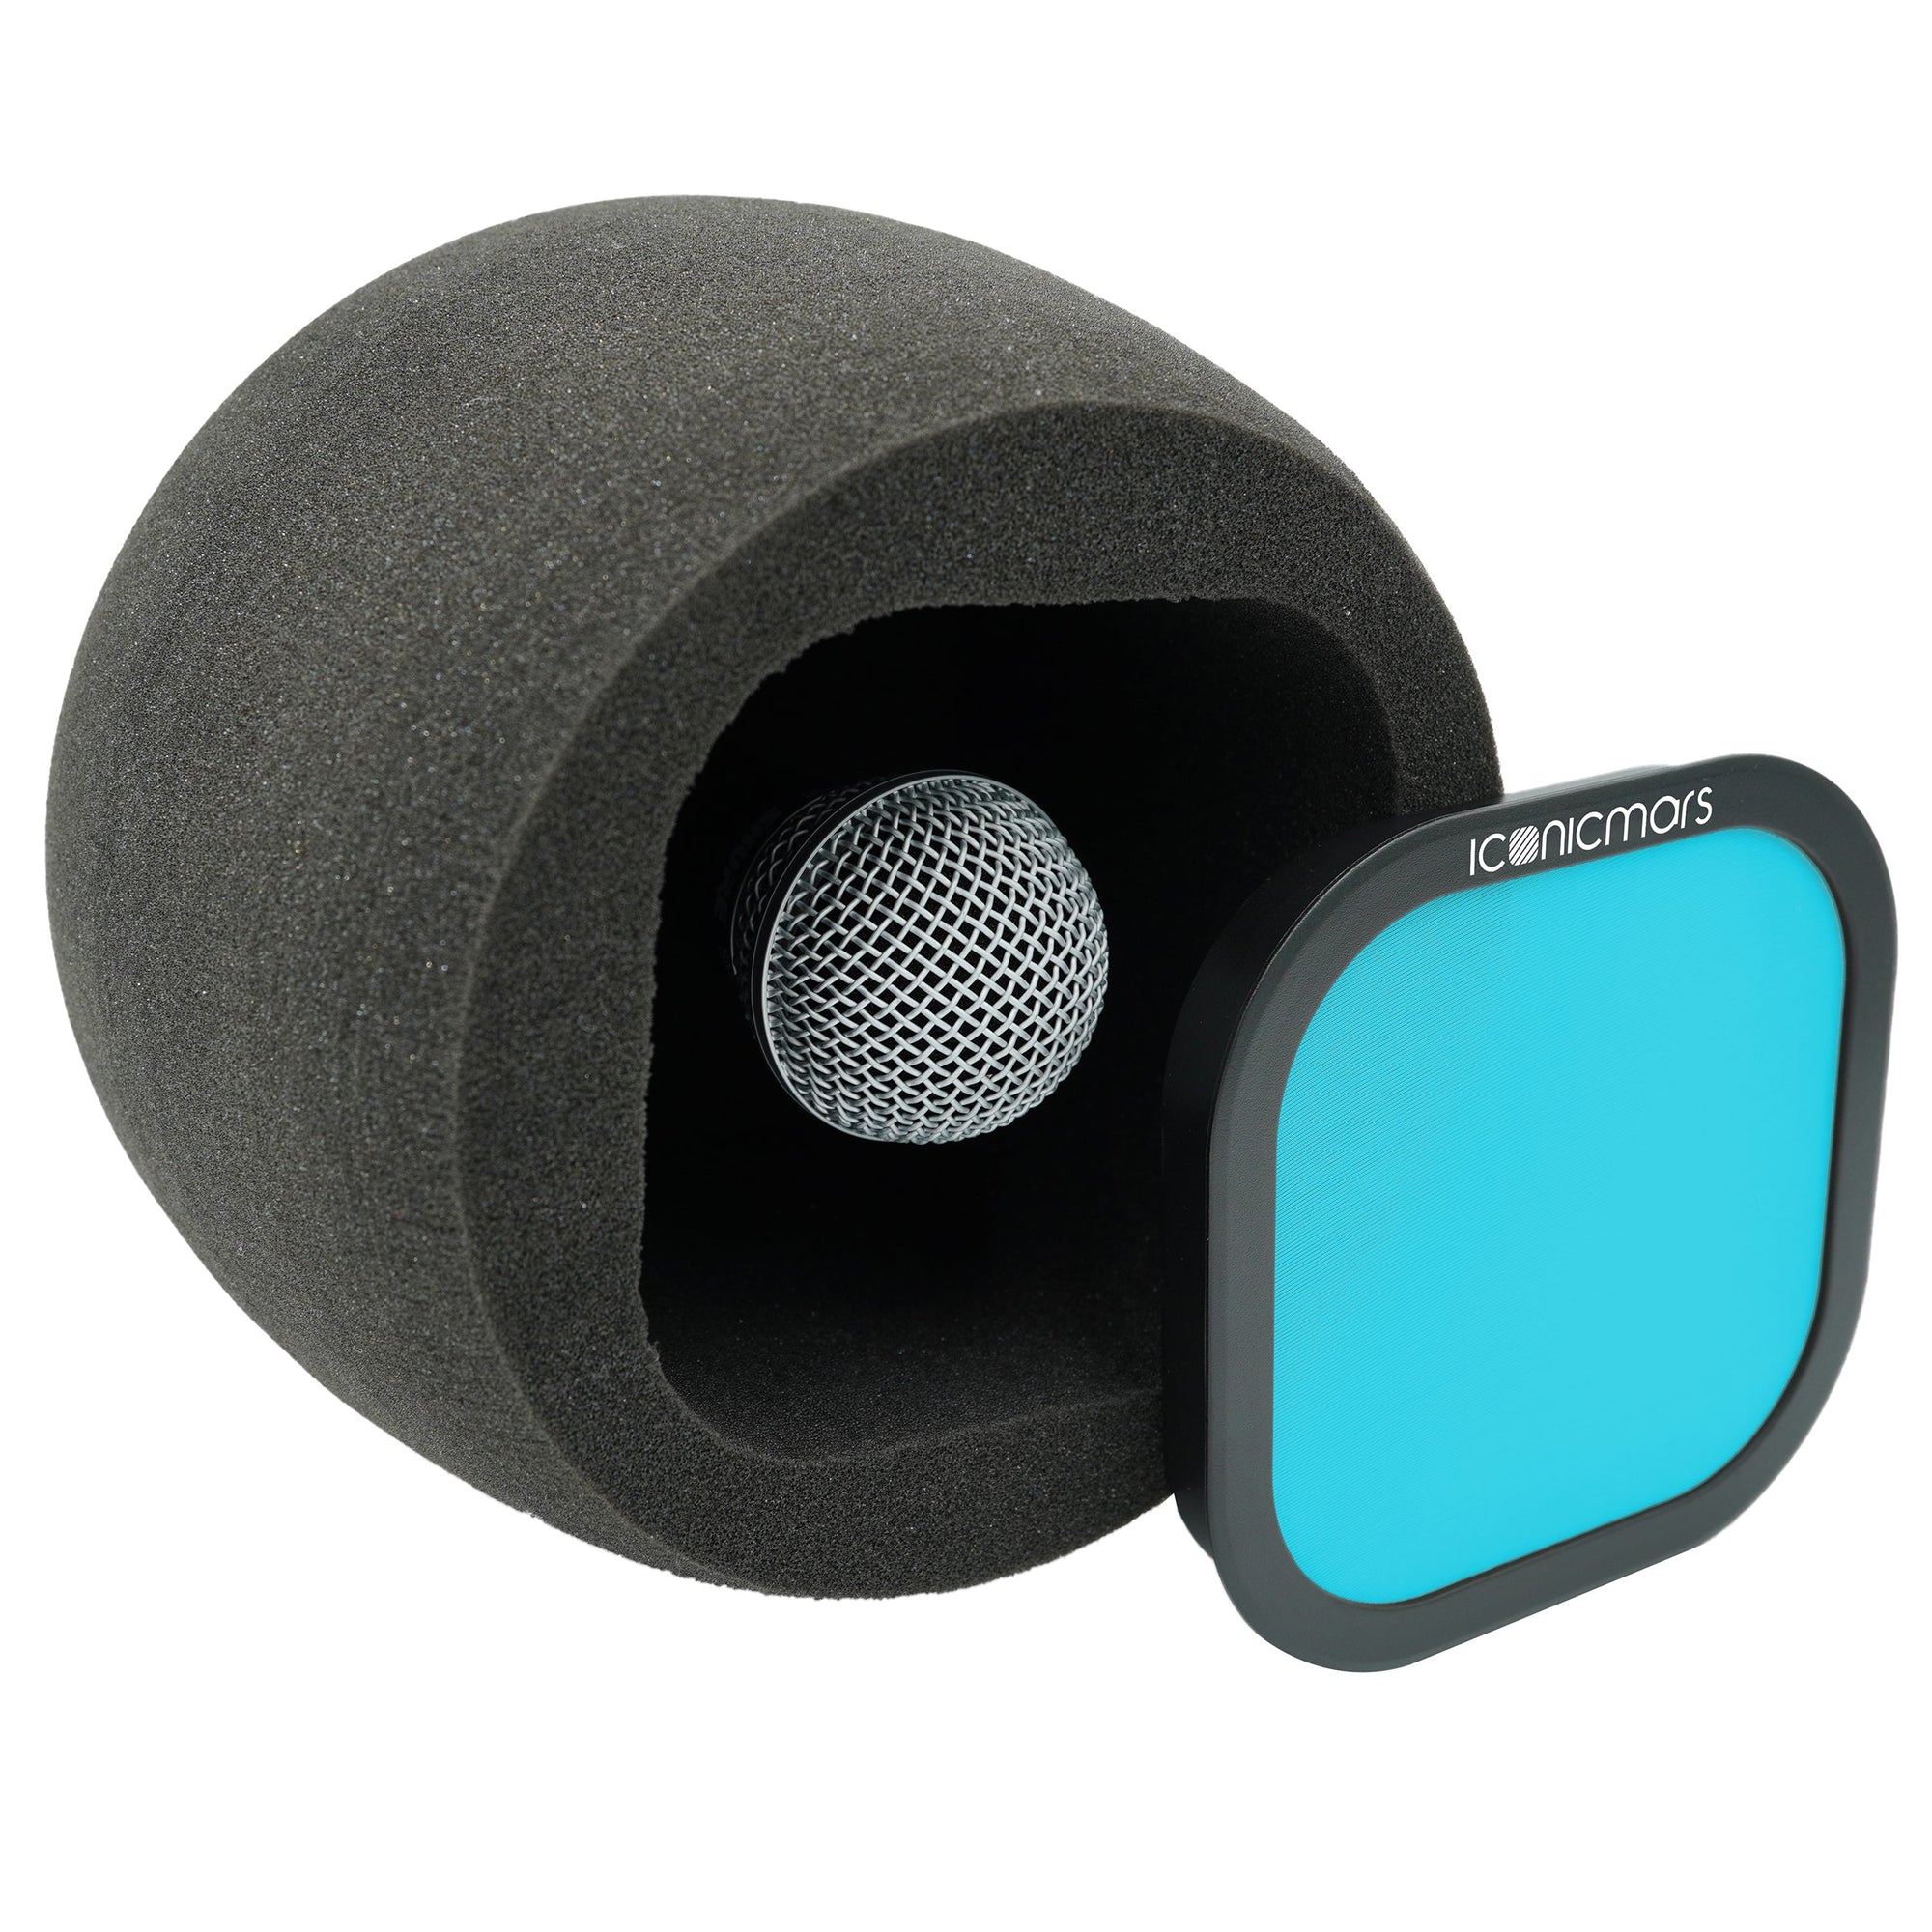 Comet X7A side view with pop filter off showing mic chamber, eyeball like design for front facing micrphone  -- Aqua Blue